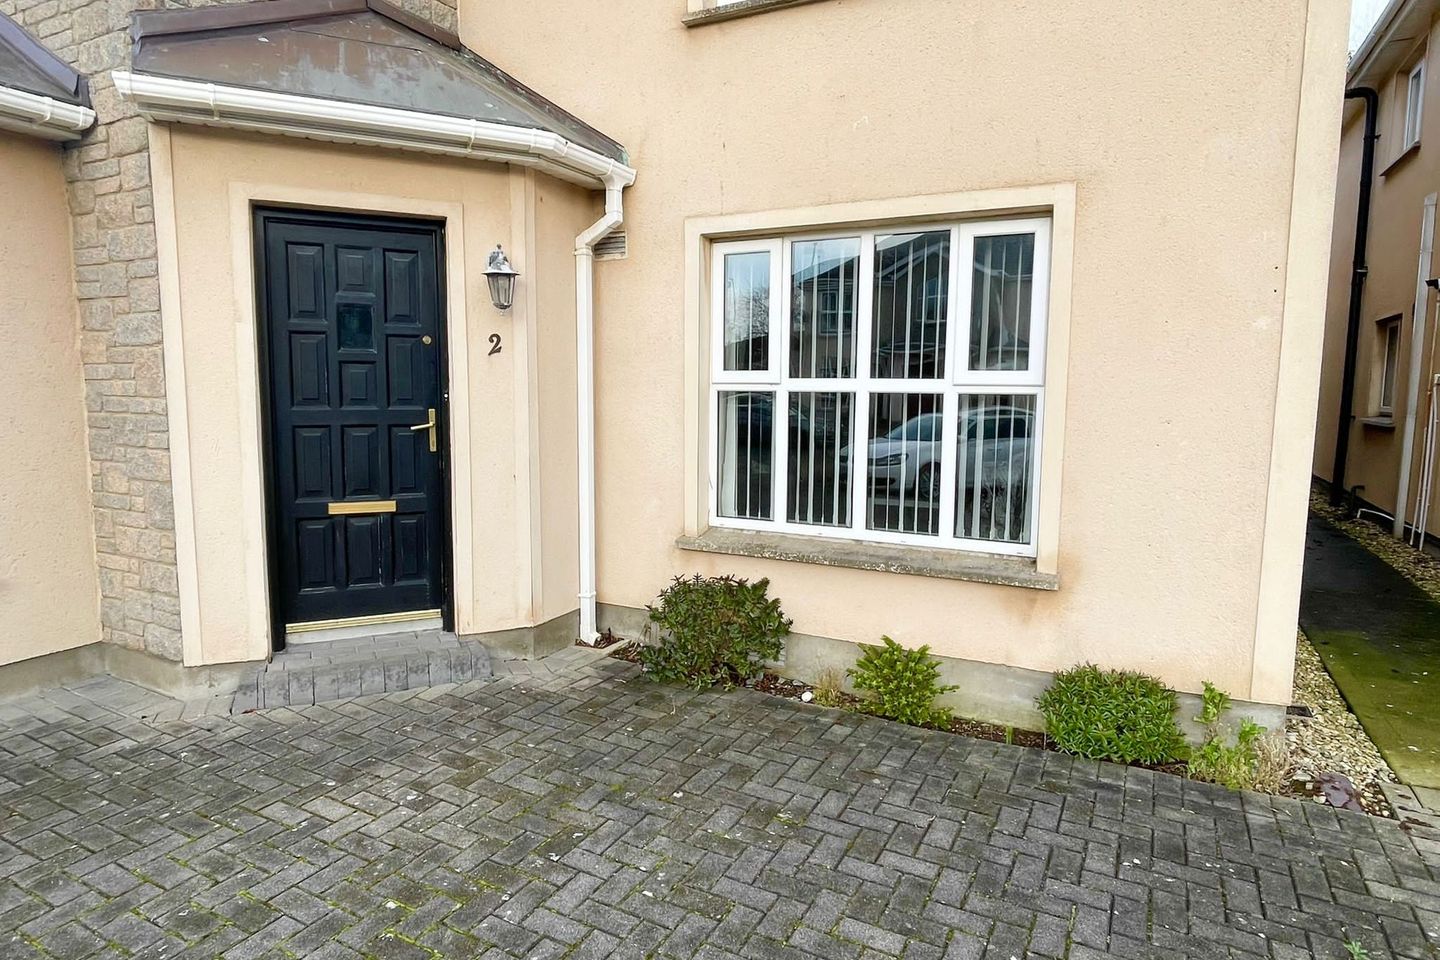 Apartment 2, Block 7, Woodford, Drogheda, Co. Louth